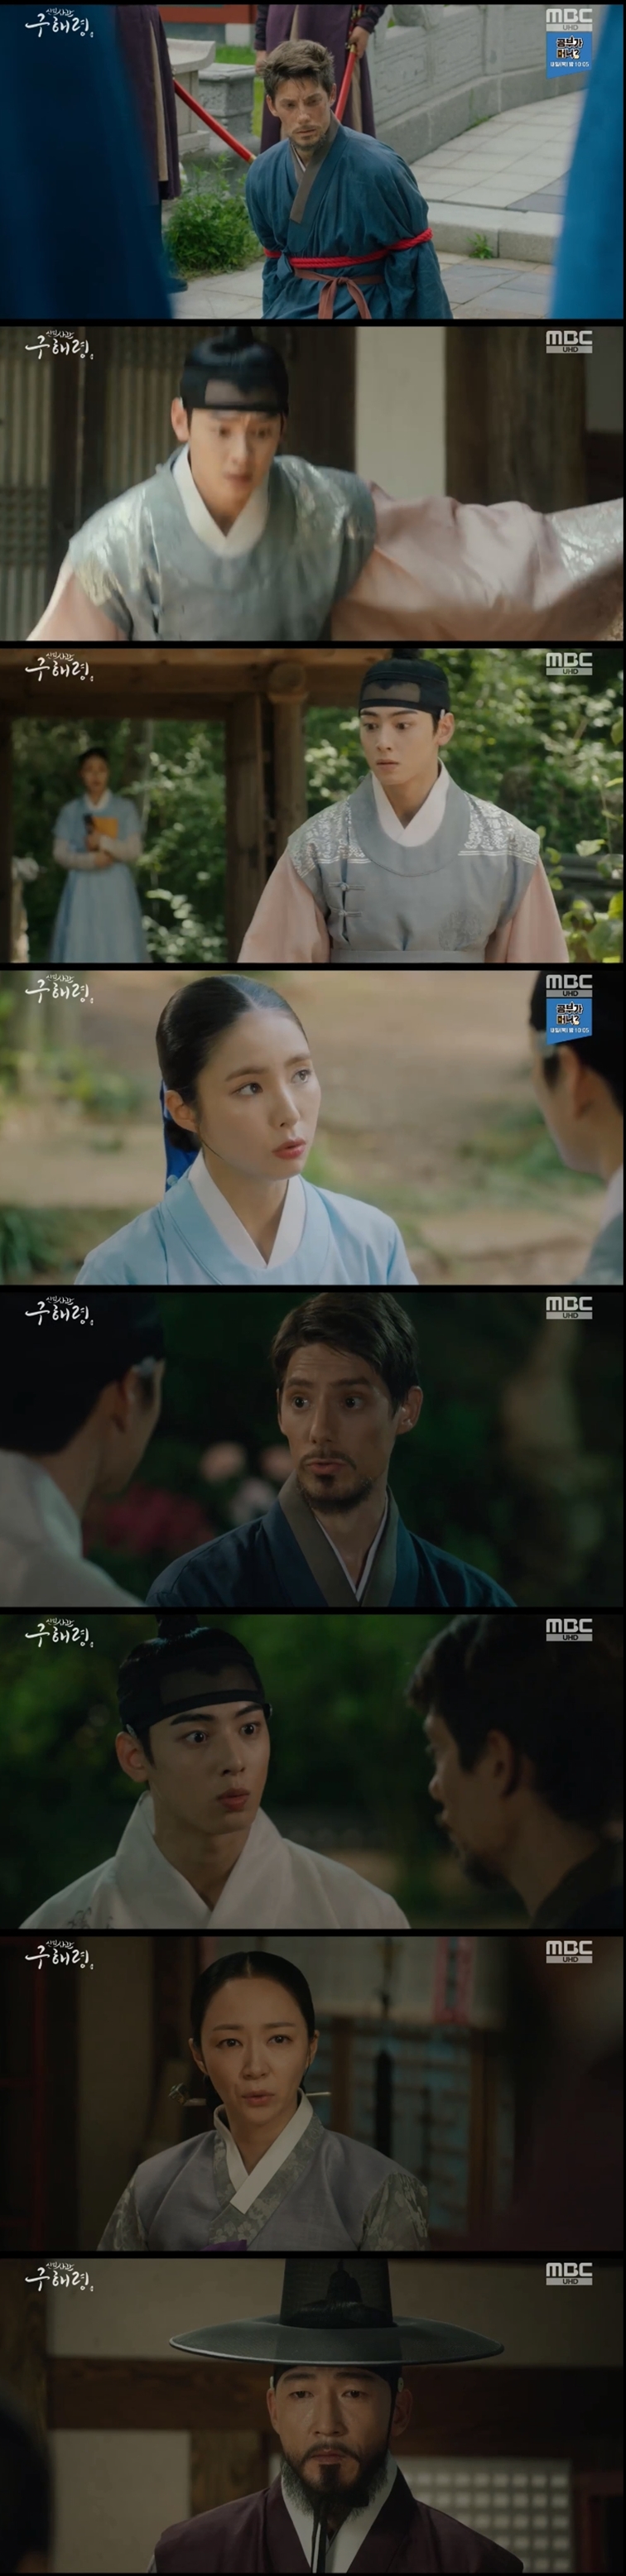 Shin Se-kyung and Cha Eun-woo of New Officer Rookie Historian Goo Hae-ryung hid the blue-eyed Westerner in the palace.In the MBC drama The New Entrepreneur Rookie Historian Goo Hae-ryung (playplayed by Kim Ho-soo / directed by Kang Il-soo, Han Hyun-hee), which was broadcast on the 28th, a Western orangkae was drawn to the palace and caused a stir.On the day, Rookie Historian Goo Hae-ryung prepared to go to work after finishing his hair and applying the ointment after kissing Irim the night before.All of them were due to the rain in the palace. The rain in the morning was also deeply in love with Rookie Historian Goo Hae-ryung.After that, Rookie Historian Goo Hae-ryung entered the place where Irim was and shared his affection.When Irim said he shouldnt be in one room with Rookie Historian Goo Hae-ryung, Rookie Historian Goo Hae-ryung kissed Irim and said, Be familiar.This is what it is, he said, making Lee Lim more excited.The Western Orangkae came into the palace, and the officials asked why they came to Joseon in Chinese, Japanese, and Dutch, but the Western Orangkae did not understand any words. He was French.However, the tax collector Lee Jin (Park Ki-woong) did not entrust the Western Orangka to the Qing Dynasty because he thought he had come to Korea with his purpose.Lee Jin ordered the Western Orangka to be abducted by By now Oksa and to find someone to interpret.But the Western Orangka did not go to By now, either; the Western Orangka sat down, complaining of abdominal pain, taking the spears of the soldiers and threatening them, hiding in the meltdown hall to avoid the bullets.Irim succeeded in catching Western orangers with Heo Sam-bo (Seongjiru) and courtesans.But Rookie Historian Goo Hae-ryung said: I will go to By now and be killed.There will be something to tell about coming to the station. But at that moment the Western Orangkae fled again: the Bible (Ji Gun-woo), a presbyterian officer, helped to hold up the cross and hide him from the Western Orangkae he came across.When the Western Orangkae was not caught, officials including Min Ik-pyeong (Choi Deok-moon) suspected that there might be a Catholic in the palace.Then, King Lee Tae (Kim Min-sang) sternly said, Wish the Catholics in the palace. The soldiers searched for Catholics from all over the palace.At the moment when the Bible was in Danger to be searched, Min Woo-won (Lee Ji-hoon), who noticed it, saved the Bible from Danger.Min Woo-won later expressed concern that Do you believe in Catholicism? All your family members were almost killed by the sign (the cross)? But the Bible showed deep faith in the Catholic doctrine.Later, the Western orangkae hid in the meltdown hall again.Lee and Rookie Historian Goo Hae-ryung accepted the Western orangka and provided rice, and asked why they came to Korea.Then, the Western Orangka said, I am a business man, I came to get the money back from Kim, who is a new bookstore in Hanyang.Later, Irim fell deeply into the story of the Western Orangkae, who said, The king of our country was hit by people. Irim felt strange about the culture of the Ideal Manri.On the other hand, Lim (Kim Yeo-jin), who was trying to sneak in the Western Orangka, was in trouble; while Lim, who was in the contrast, ordered Mohwa (Jeon Ik-ryeong) to never hand him over, not alive or dead. =